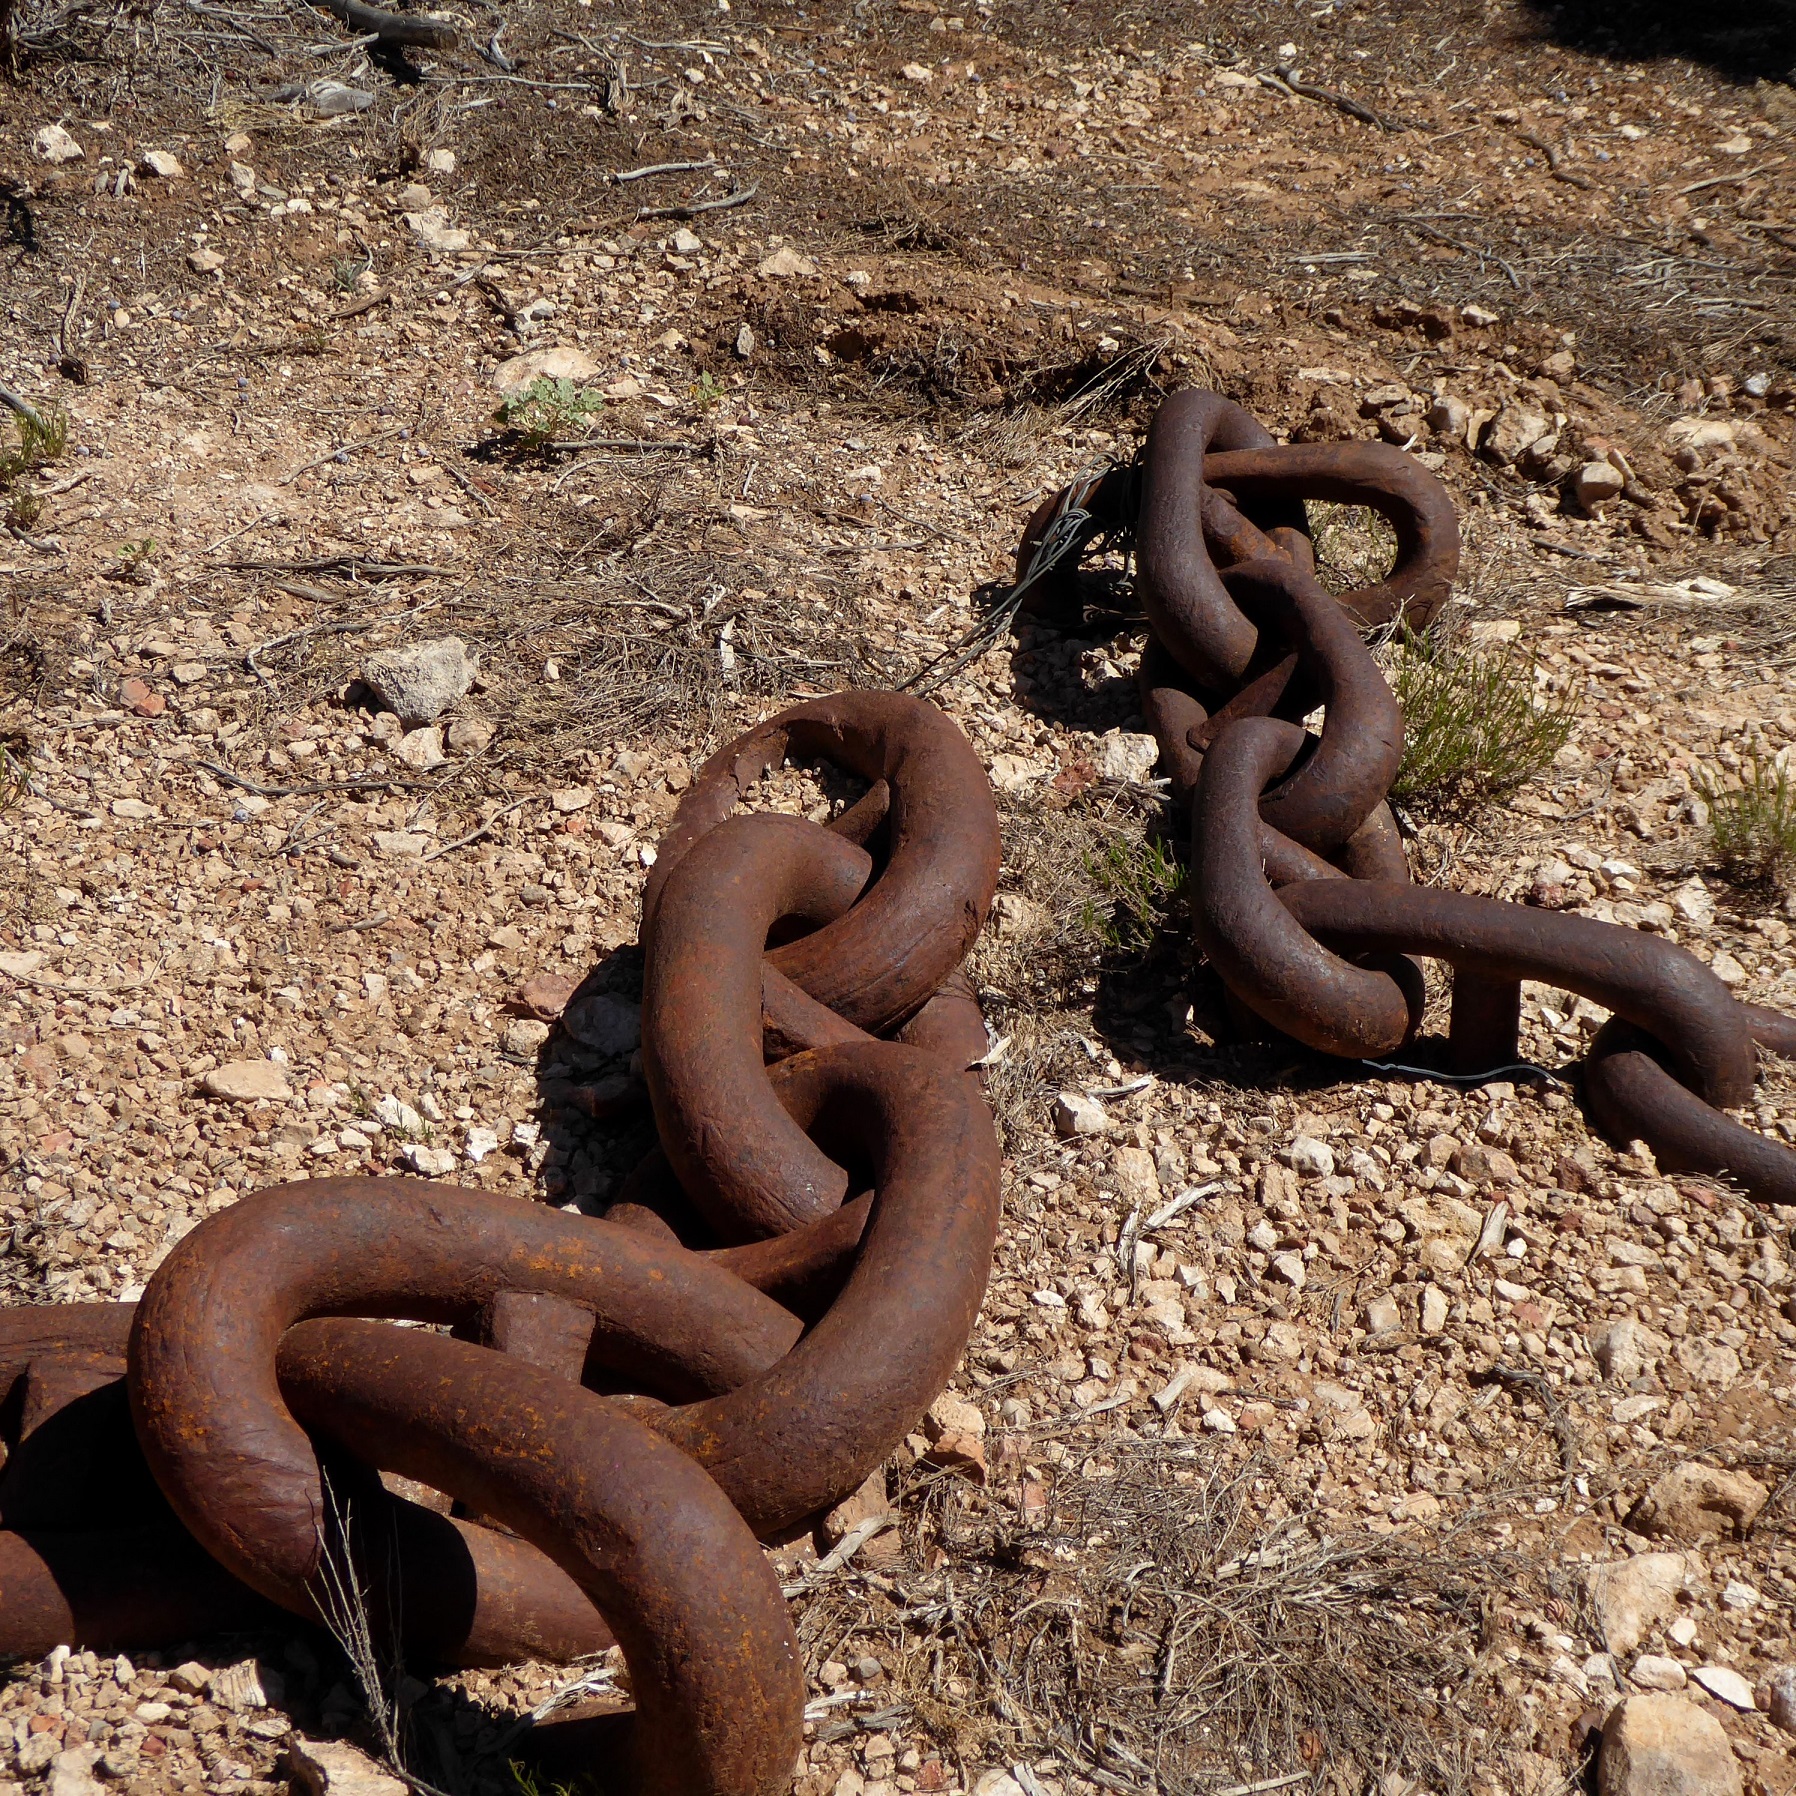 A segment of chain lining the parking area at the BLM Poverty Admin Site